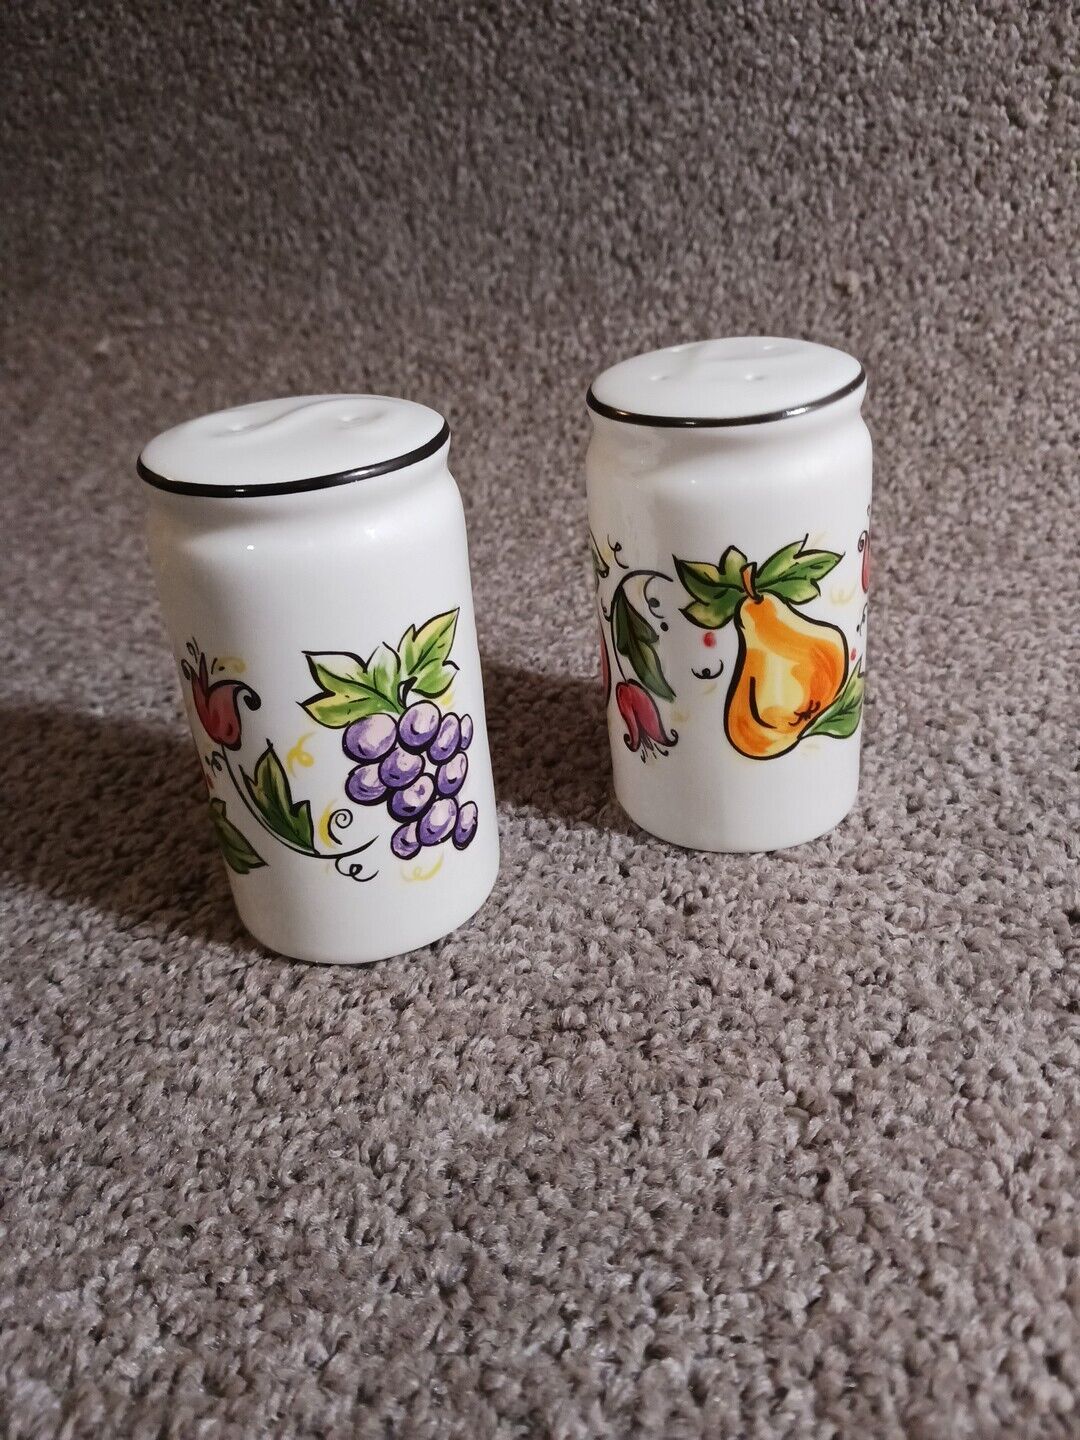 Vintage Salt and Pepper Shakers, 80’s Fruit Themed, Grapes, Apples Pears, Flower